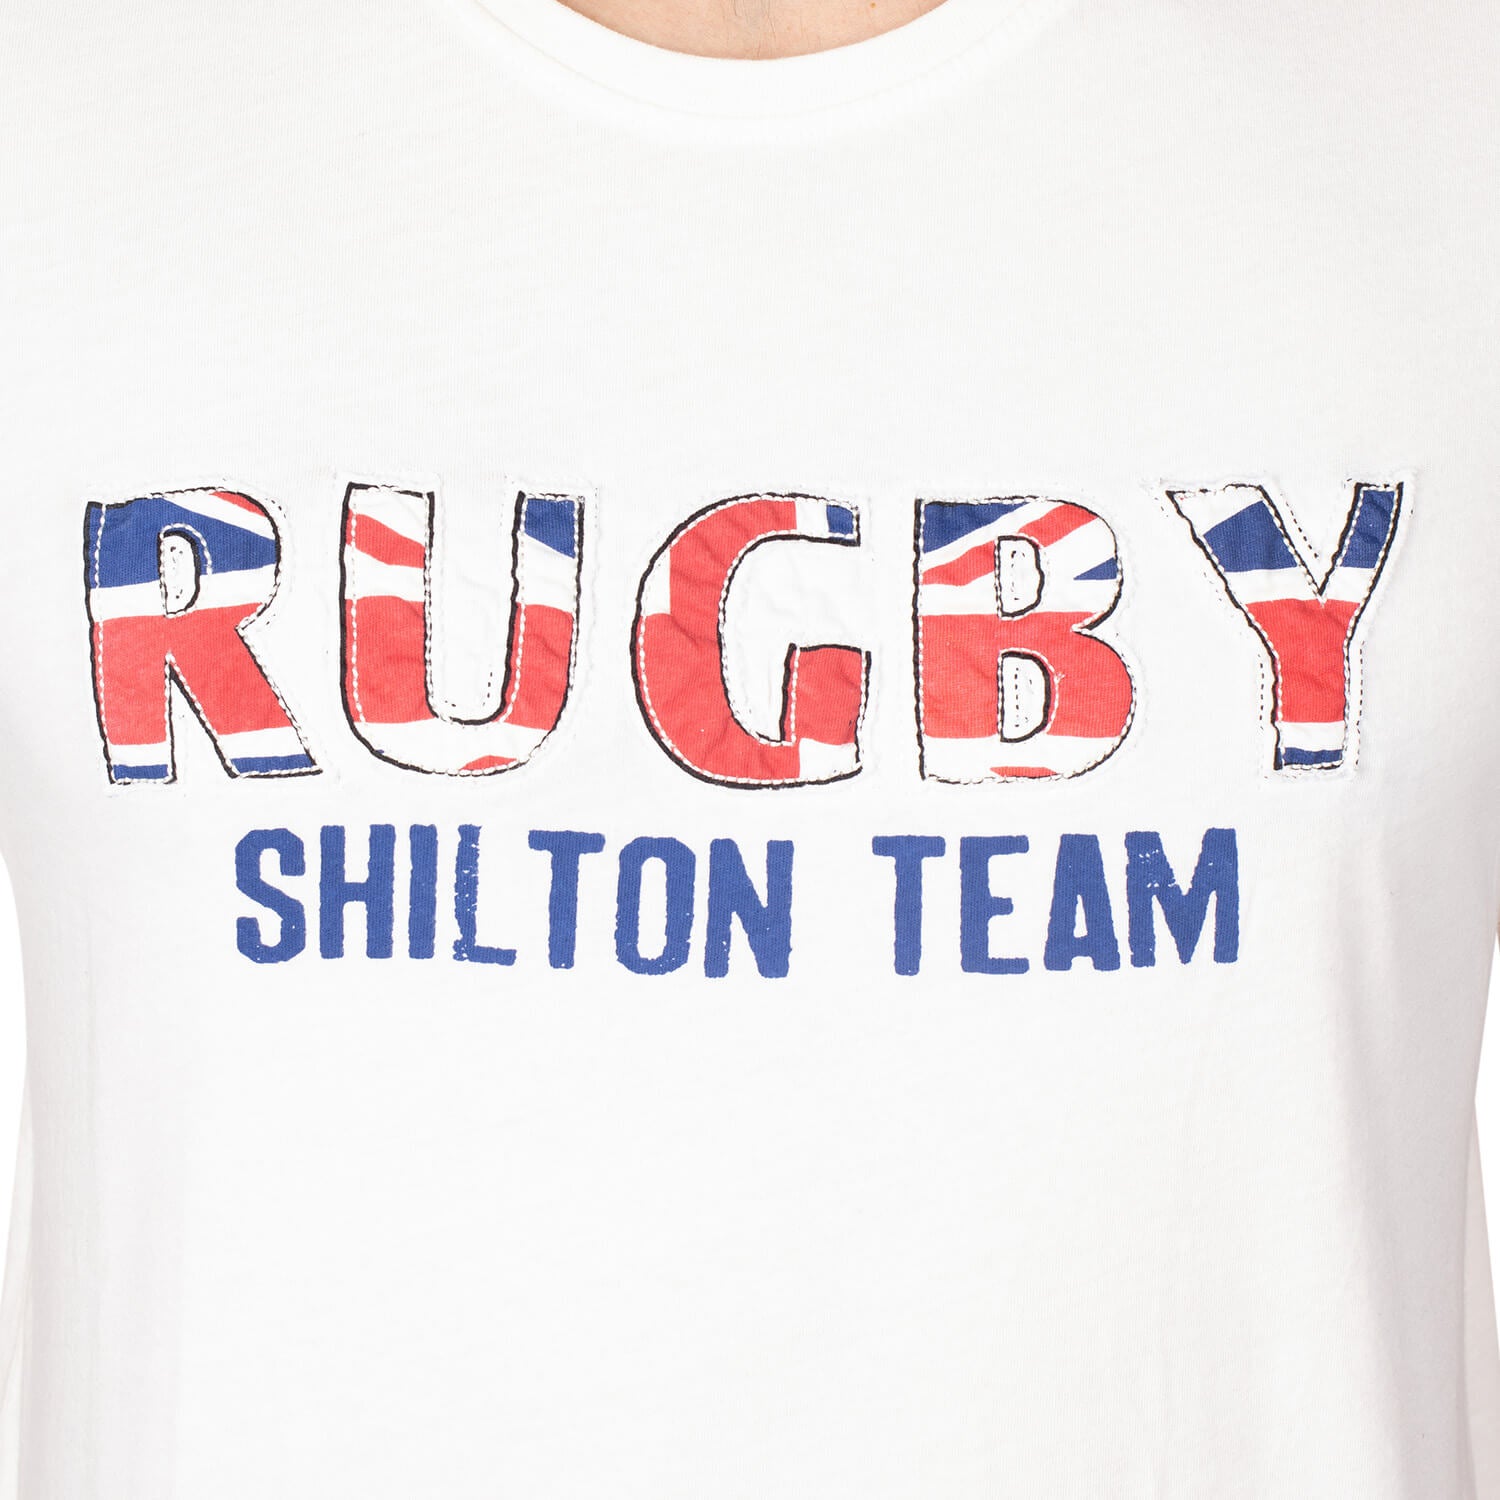 T-shirt rugby vintage